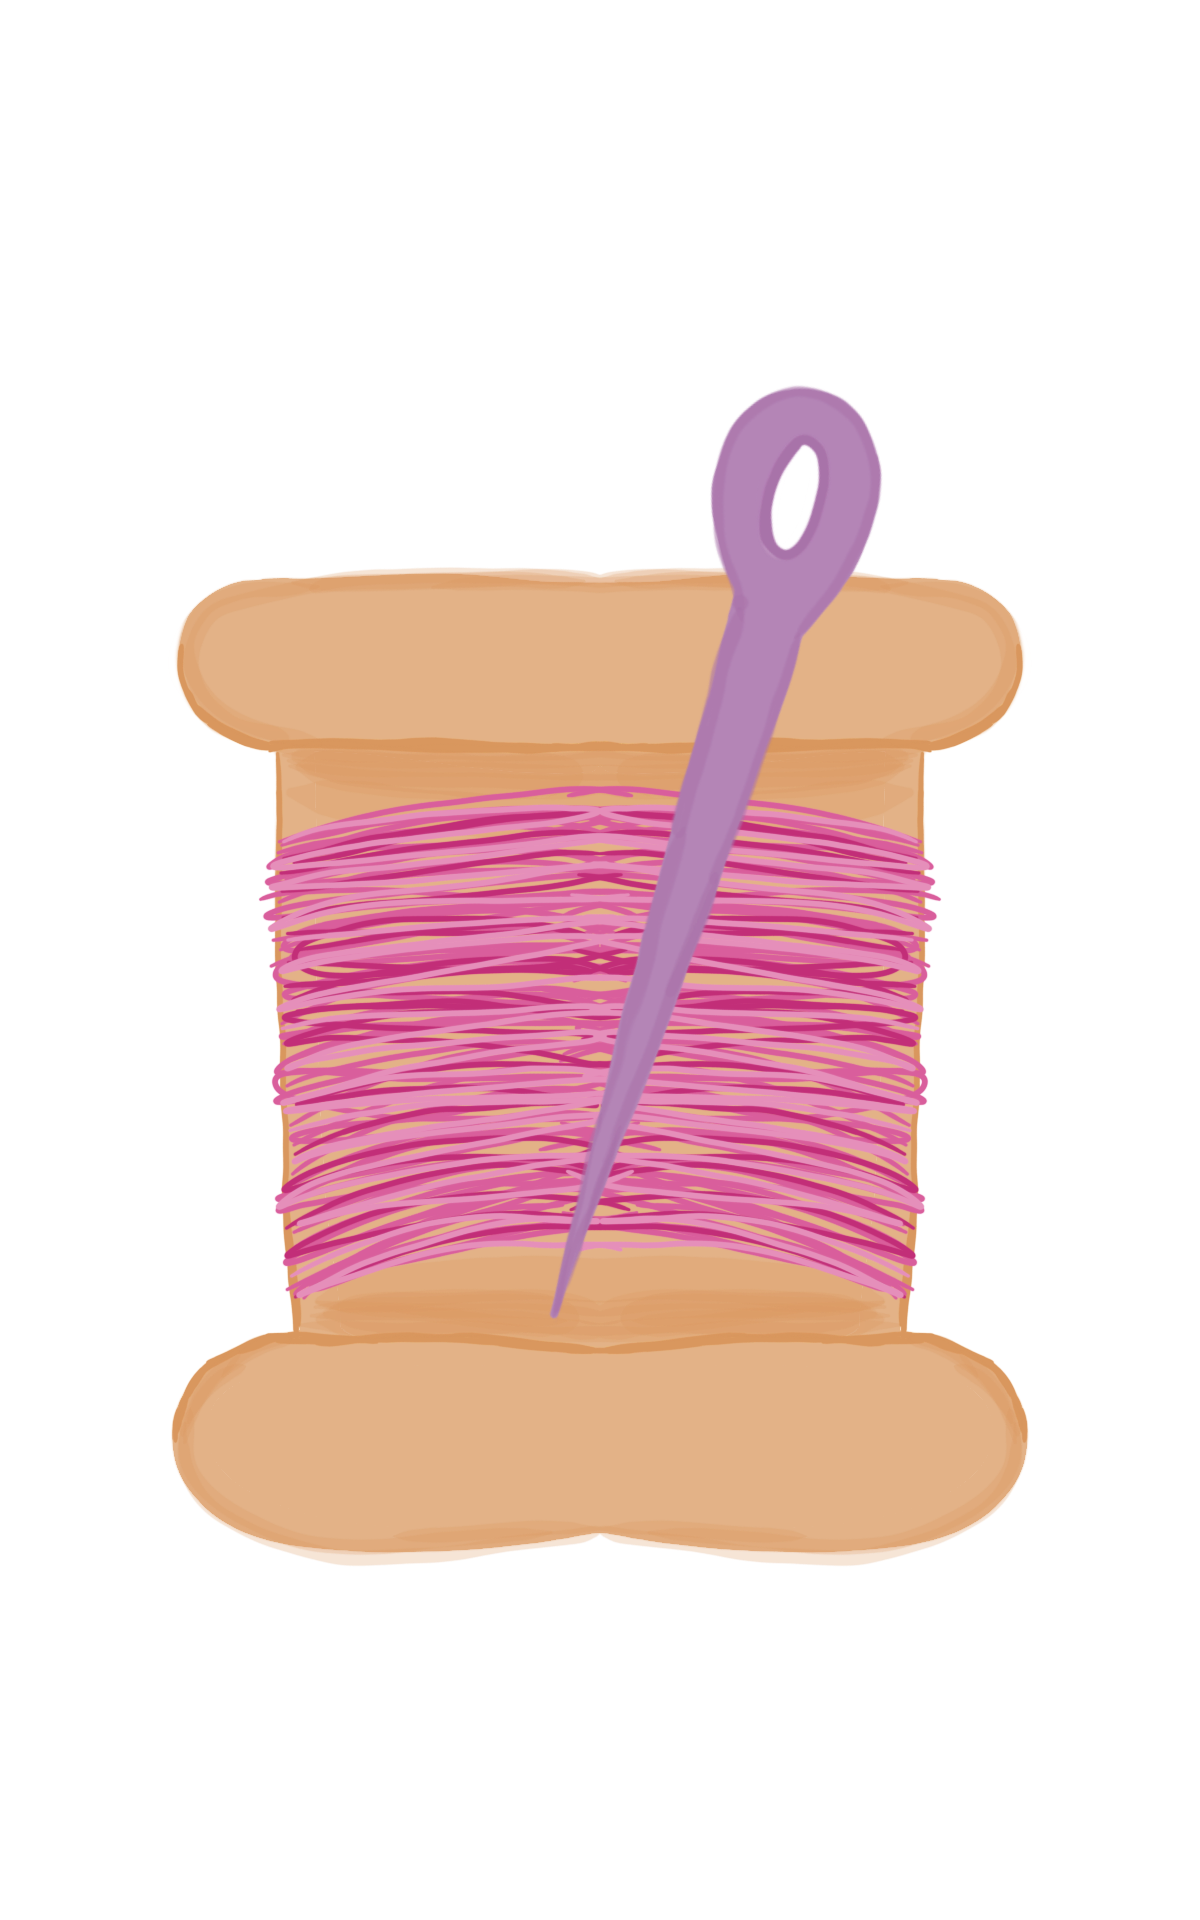 spool of thread with a sewing needle